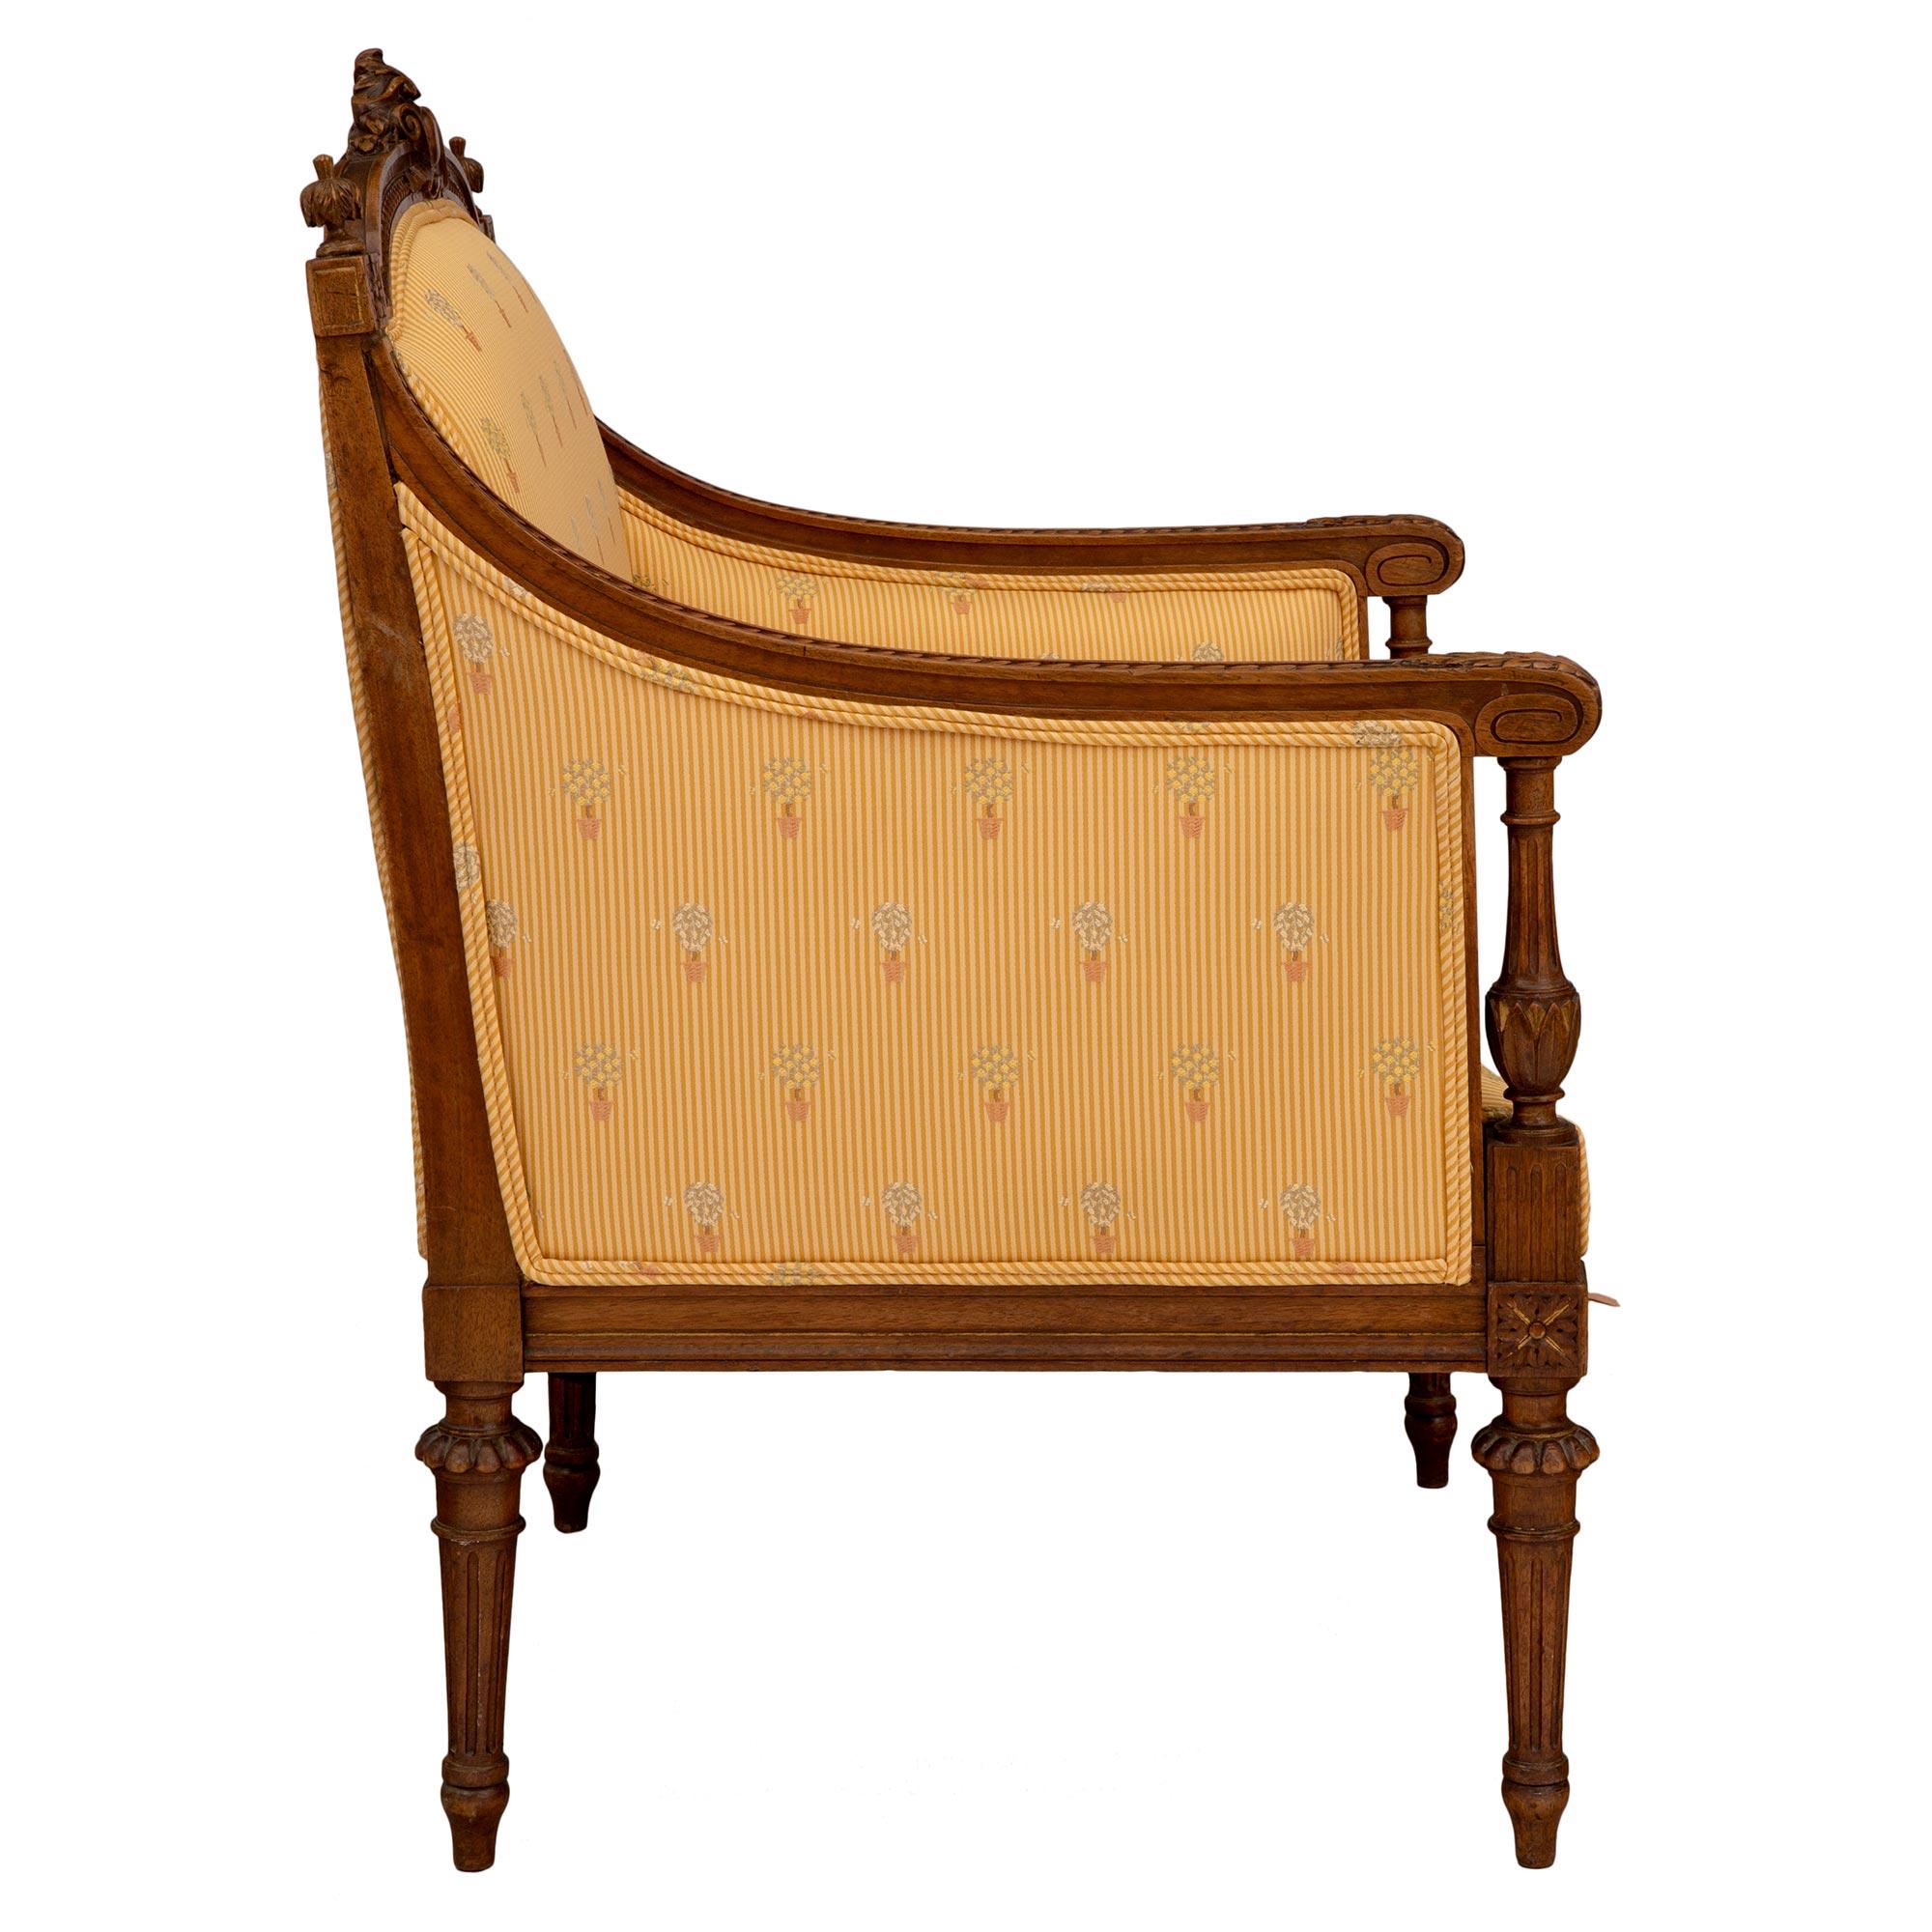 French 19th Century Louis XVI St. Solid Oak Marquise Armchair In Good Condition For Sale In West Palm Beach, FL